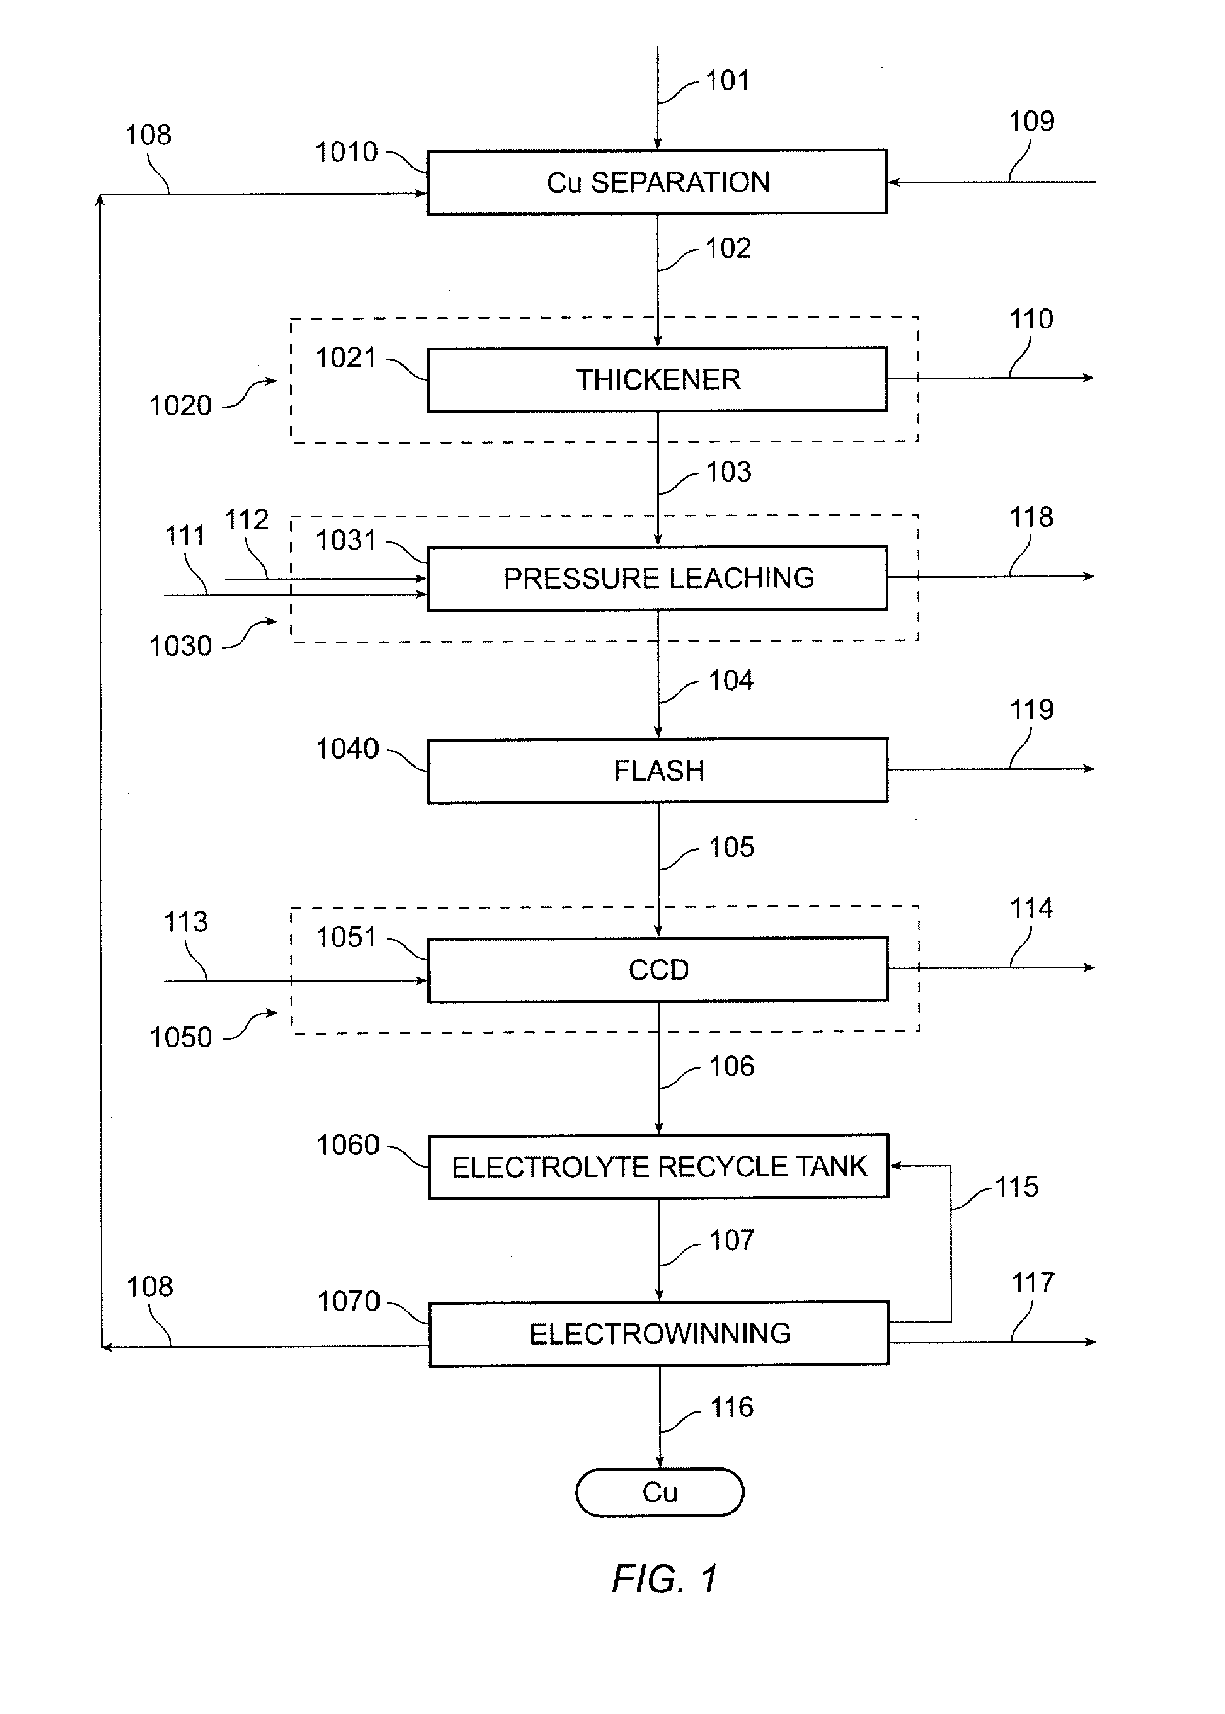 Method for recovering copper from copper-containing materials using direct electrowinning